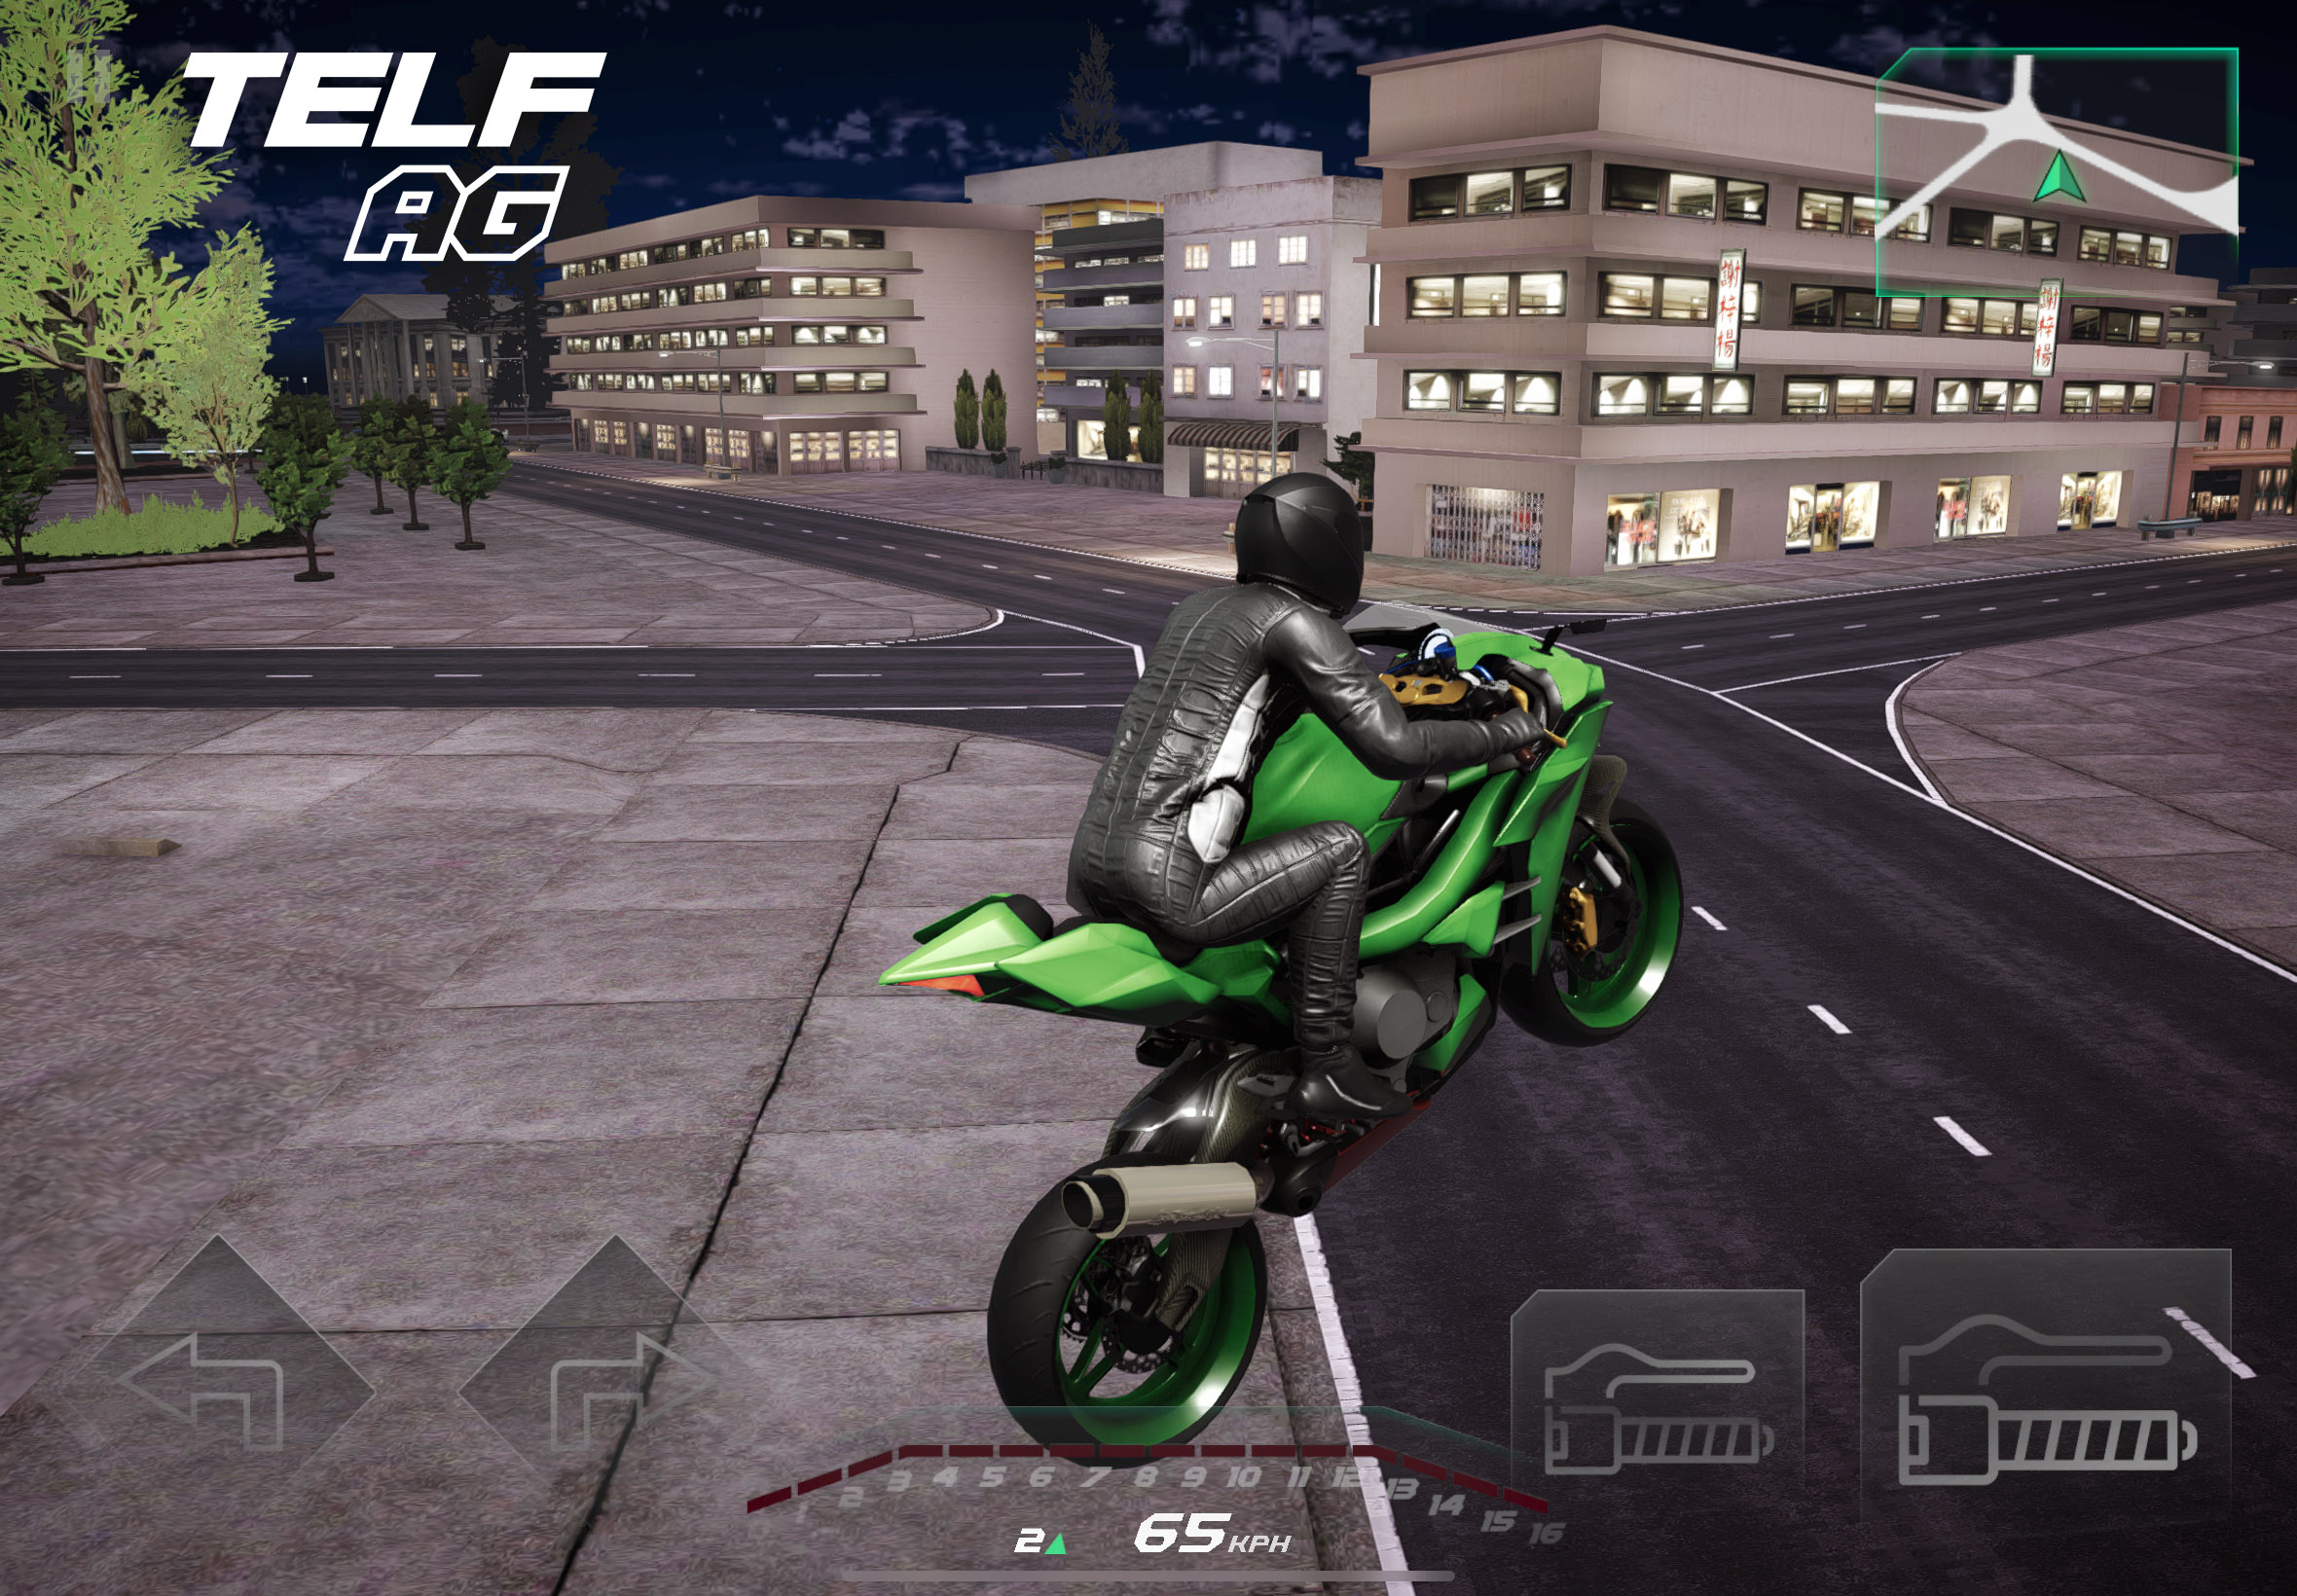 Telf AG “Racing" - The Epitome of Racing Evolution, Now Exclusively on iOS